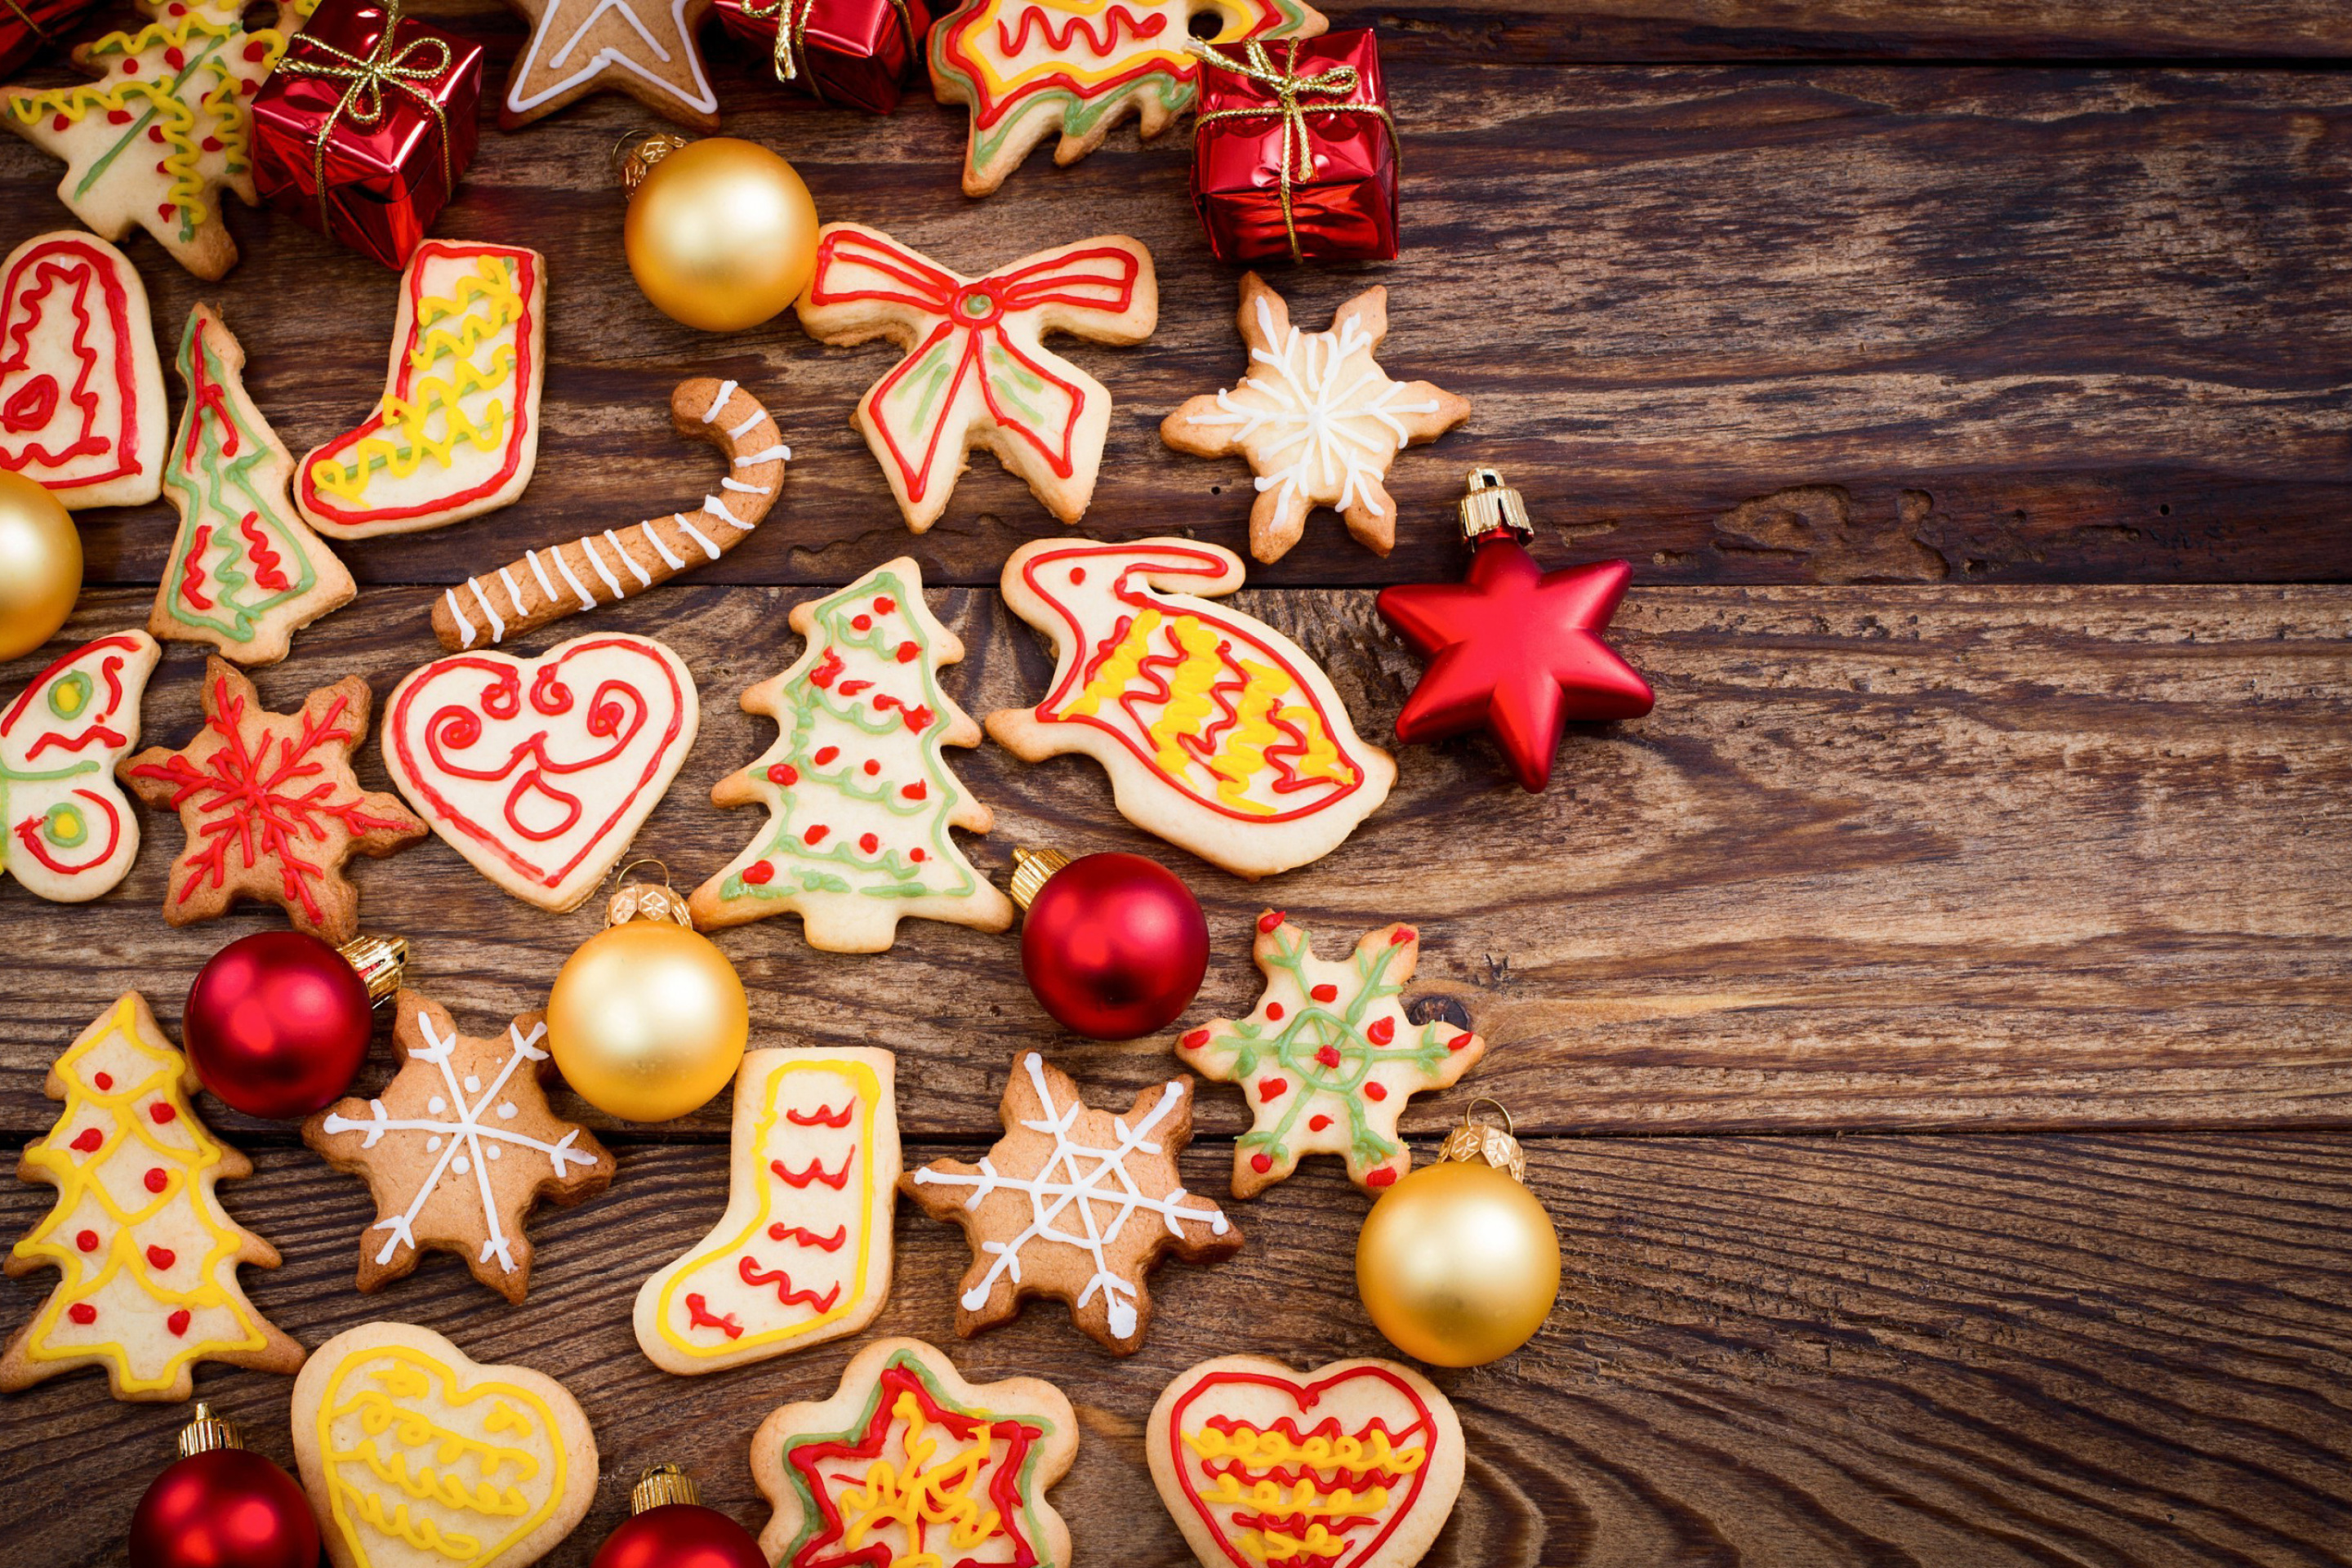 Christmas Decorations Cookies and Balls wallpaper 2880x1920